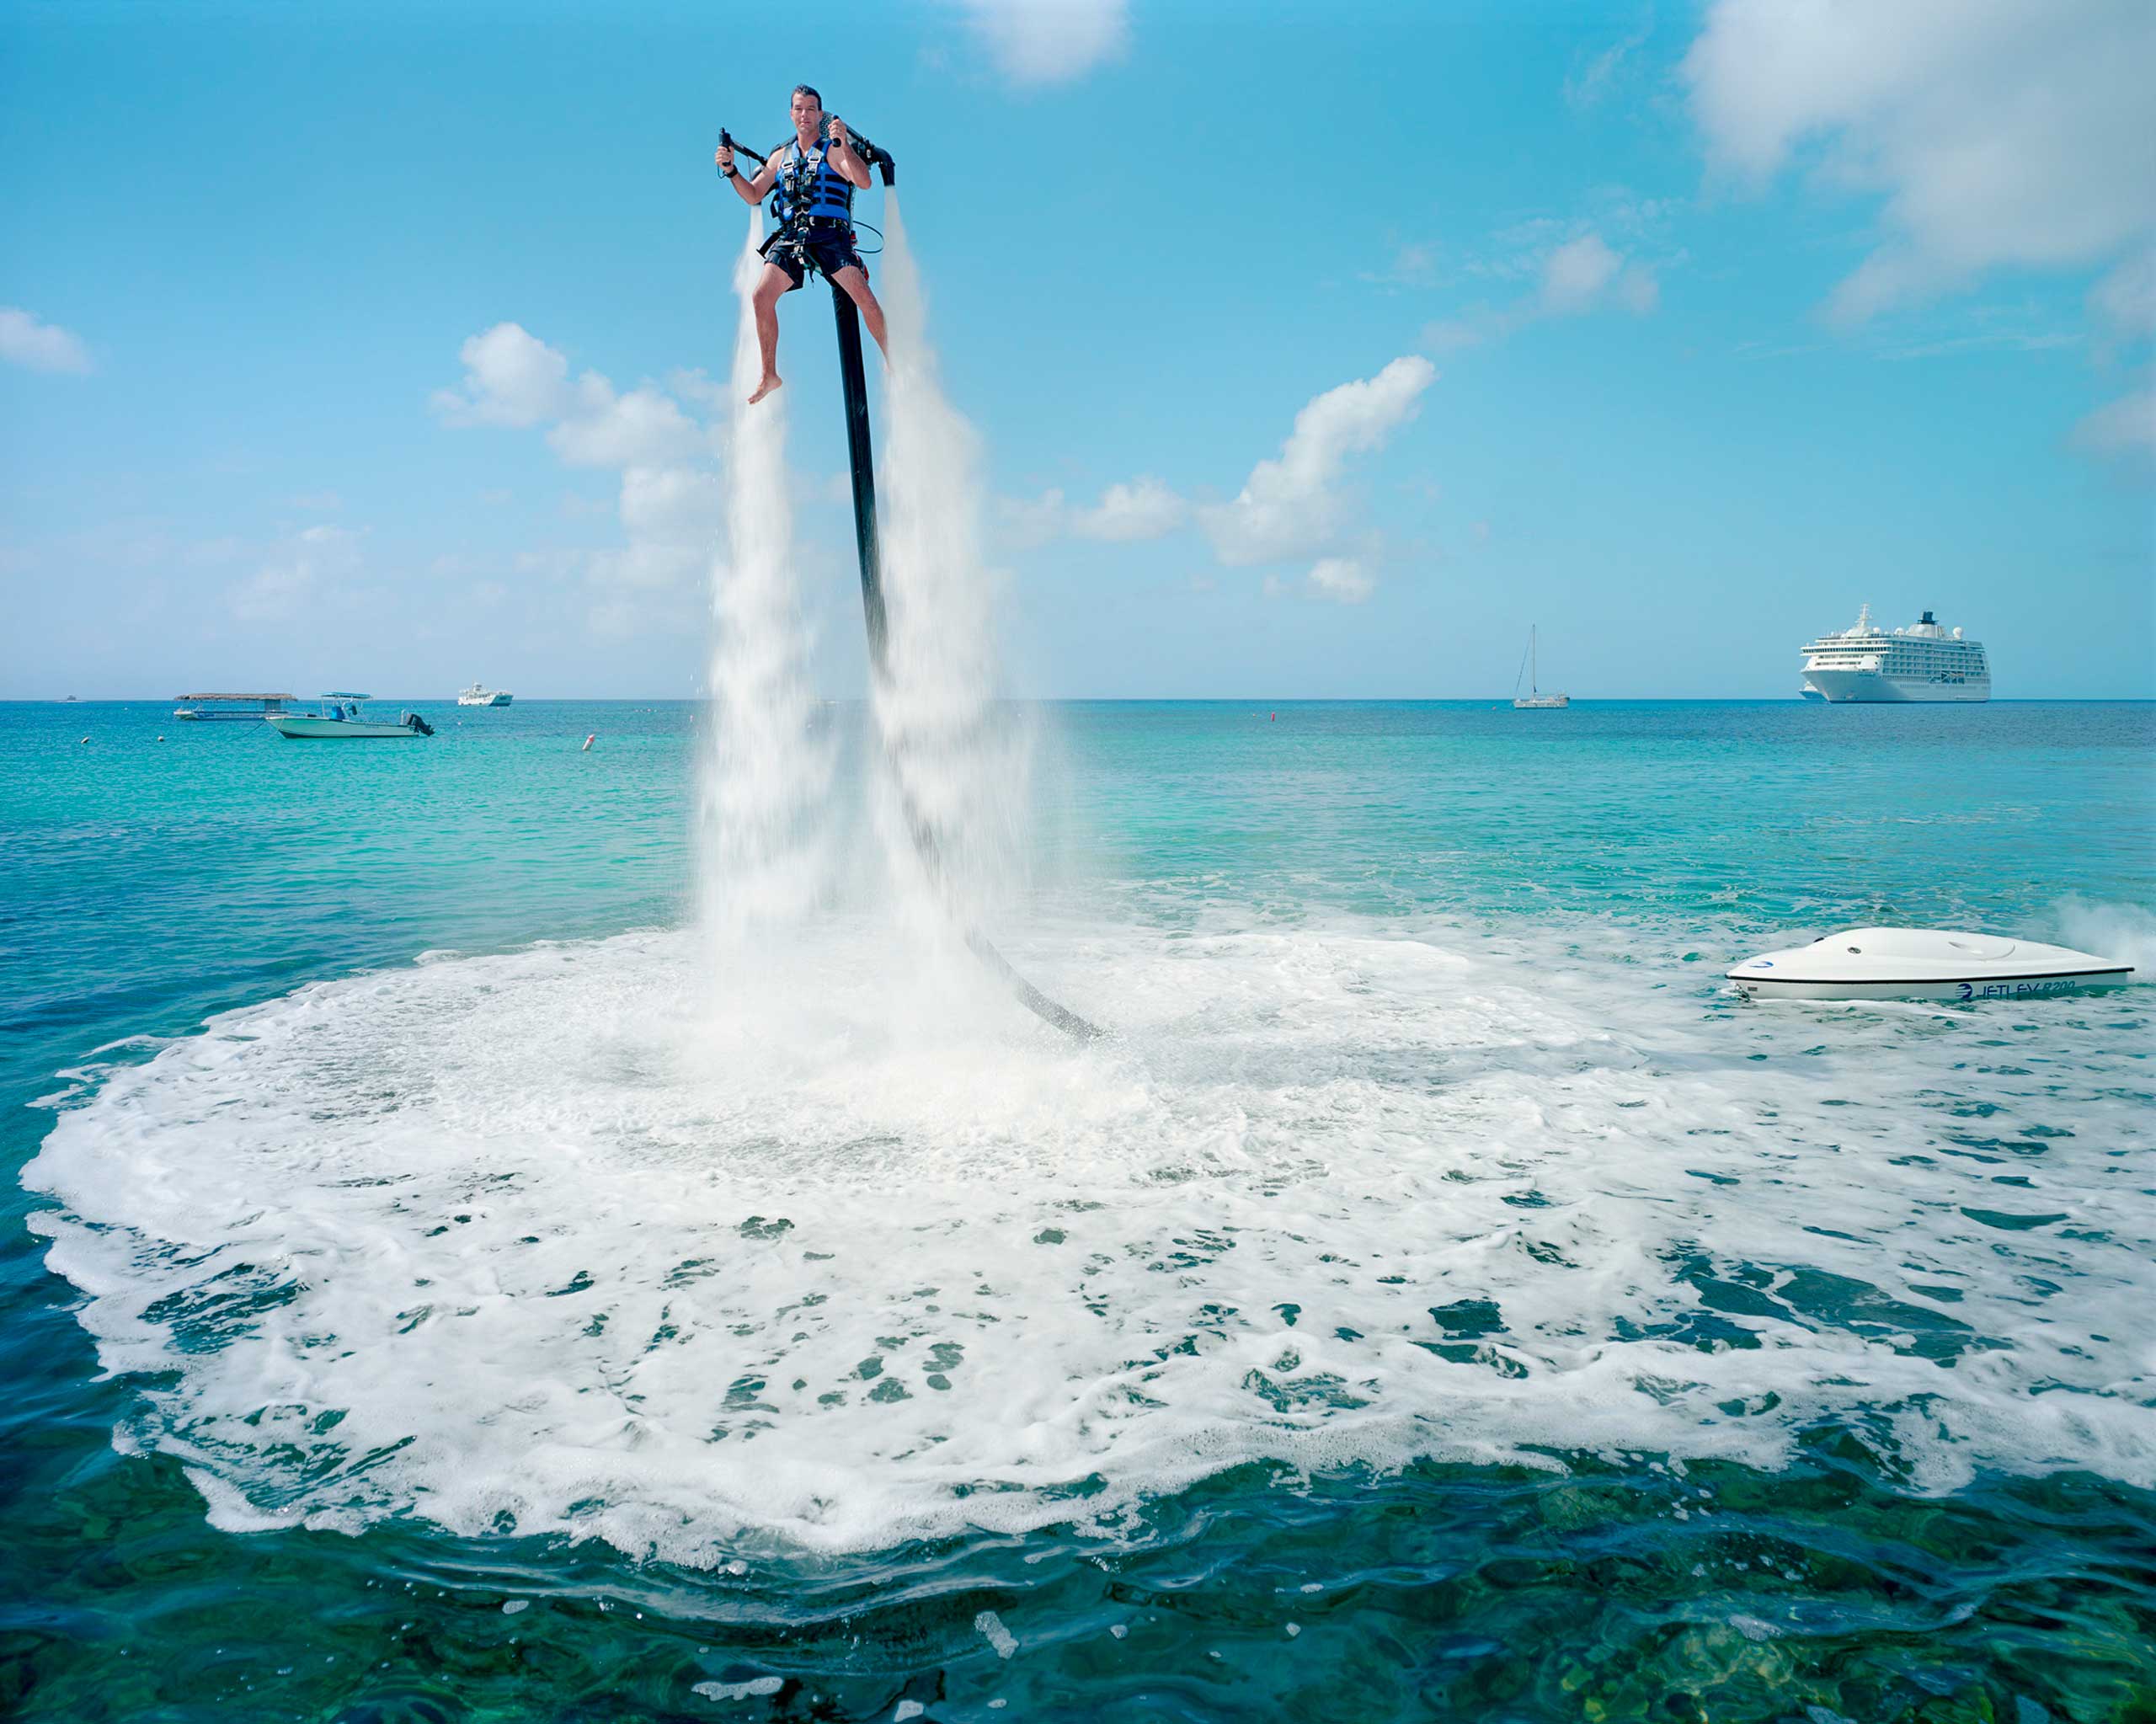 An employee of “Jetpack Cayman” demonstrates this new watersport, now available on the island. A 2000cc motor pumps water up through the Jetpack, propelling the client out of the sea ($359 for a 30-minute session). Mike Thalasinos, the owner of the company, remarks, “The Jetpack is zero gravity, the Cayman are zero taxes, we are in the right place!” Grand Cayman. (Gabriele Galimberti and Paolo Woods—Institute)